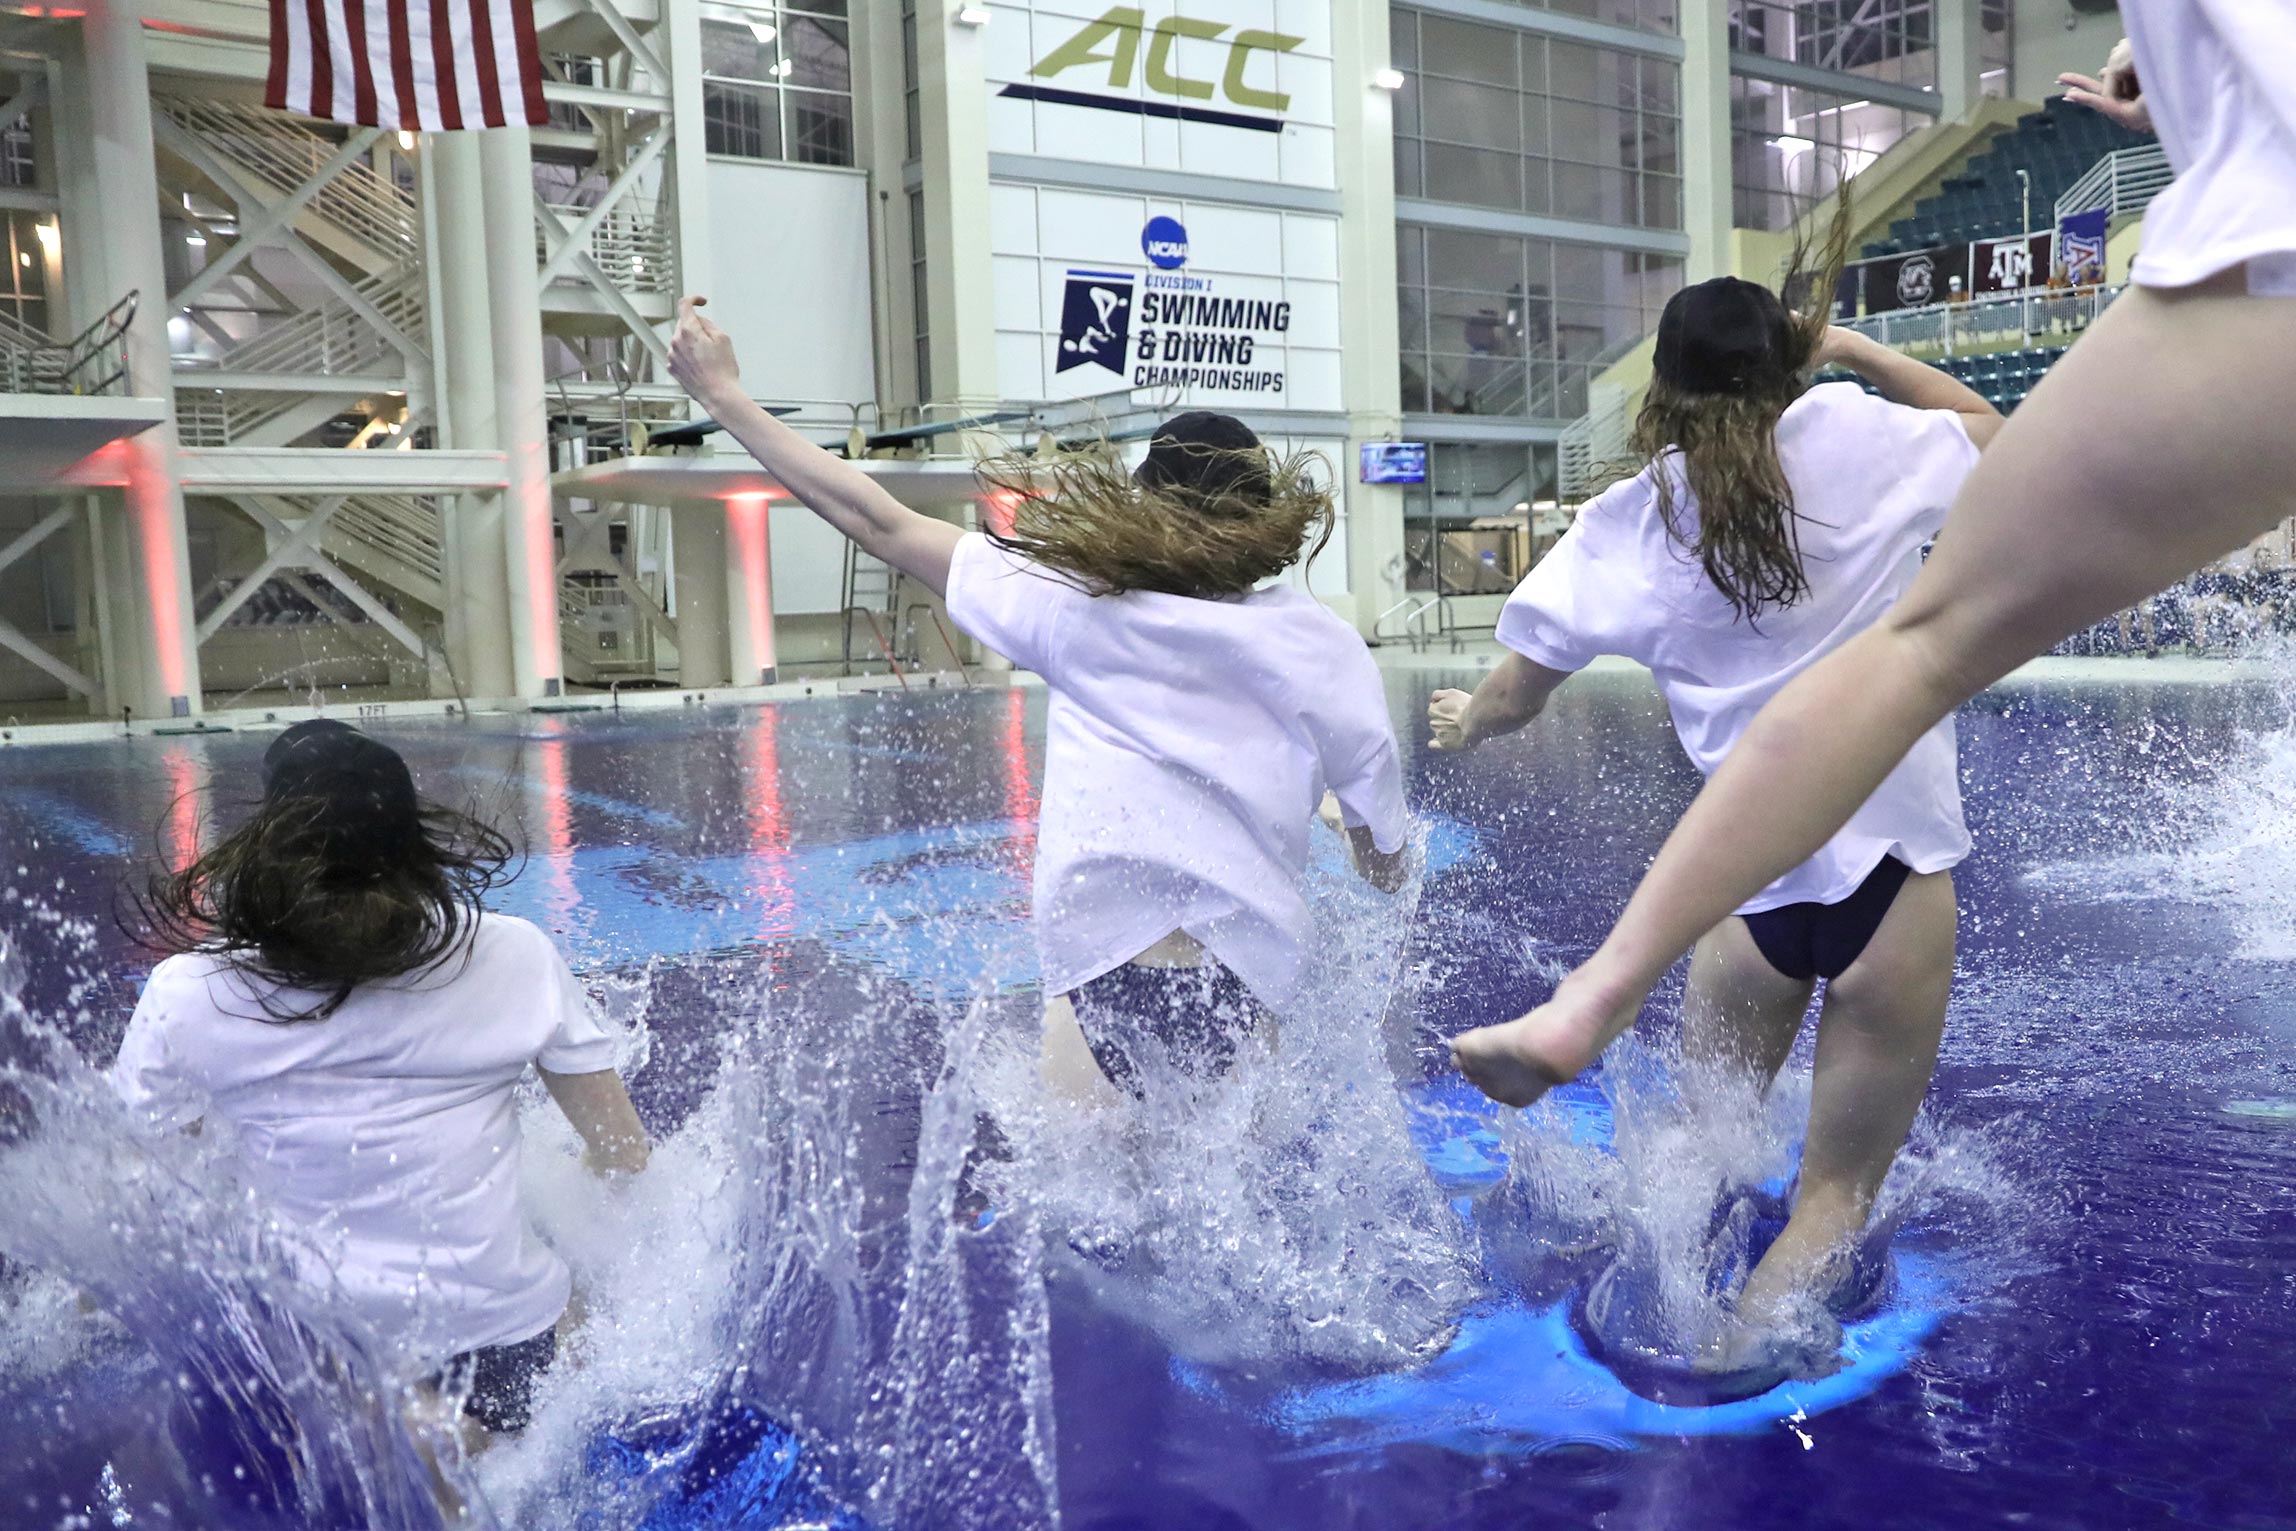 Several women in t-shirts and baseball caps excitedly jump into a pool